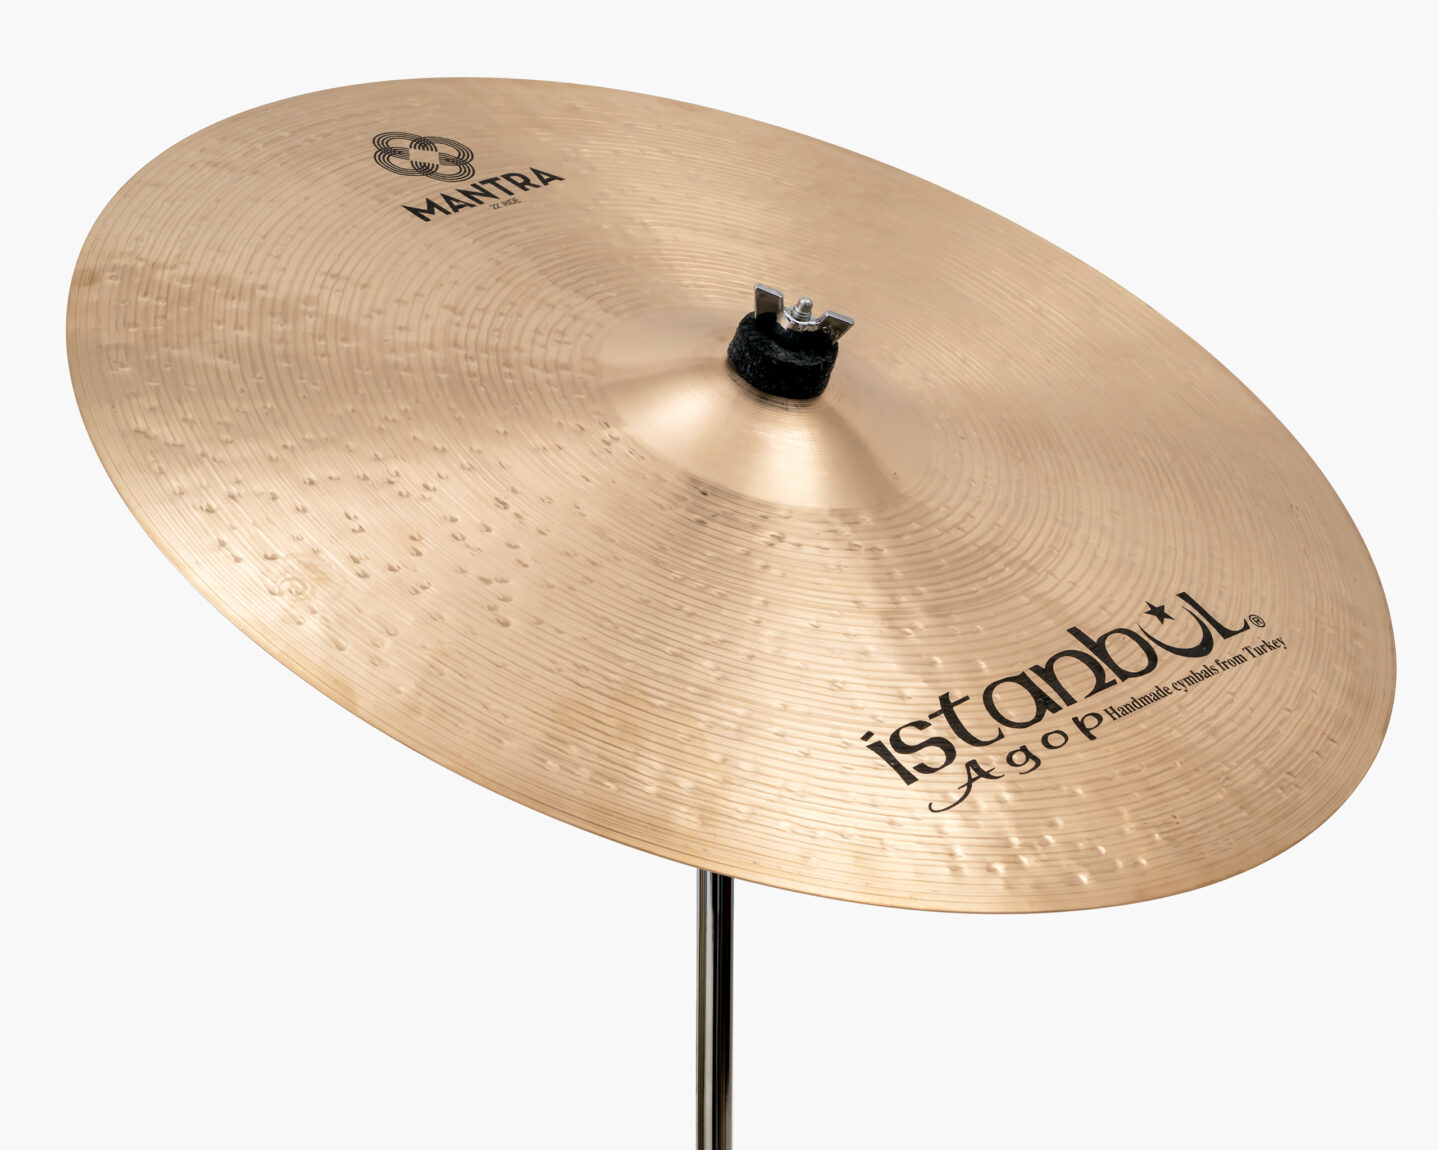 Istanbul Agop 22" Mantra Ride Cymbal